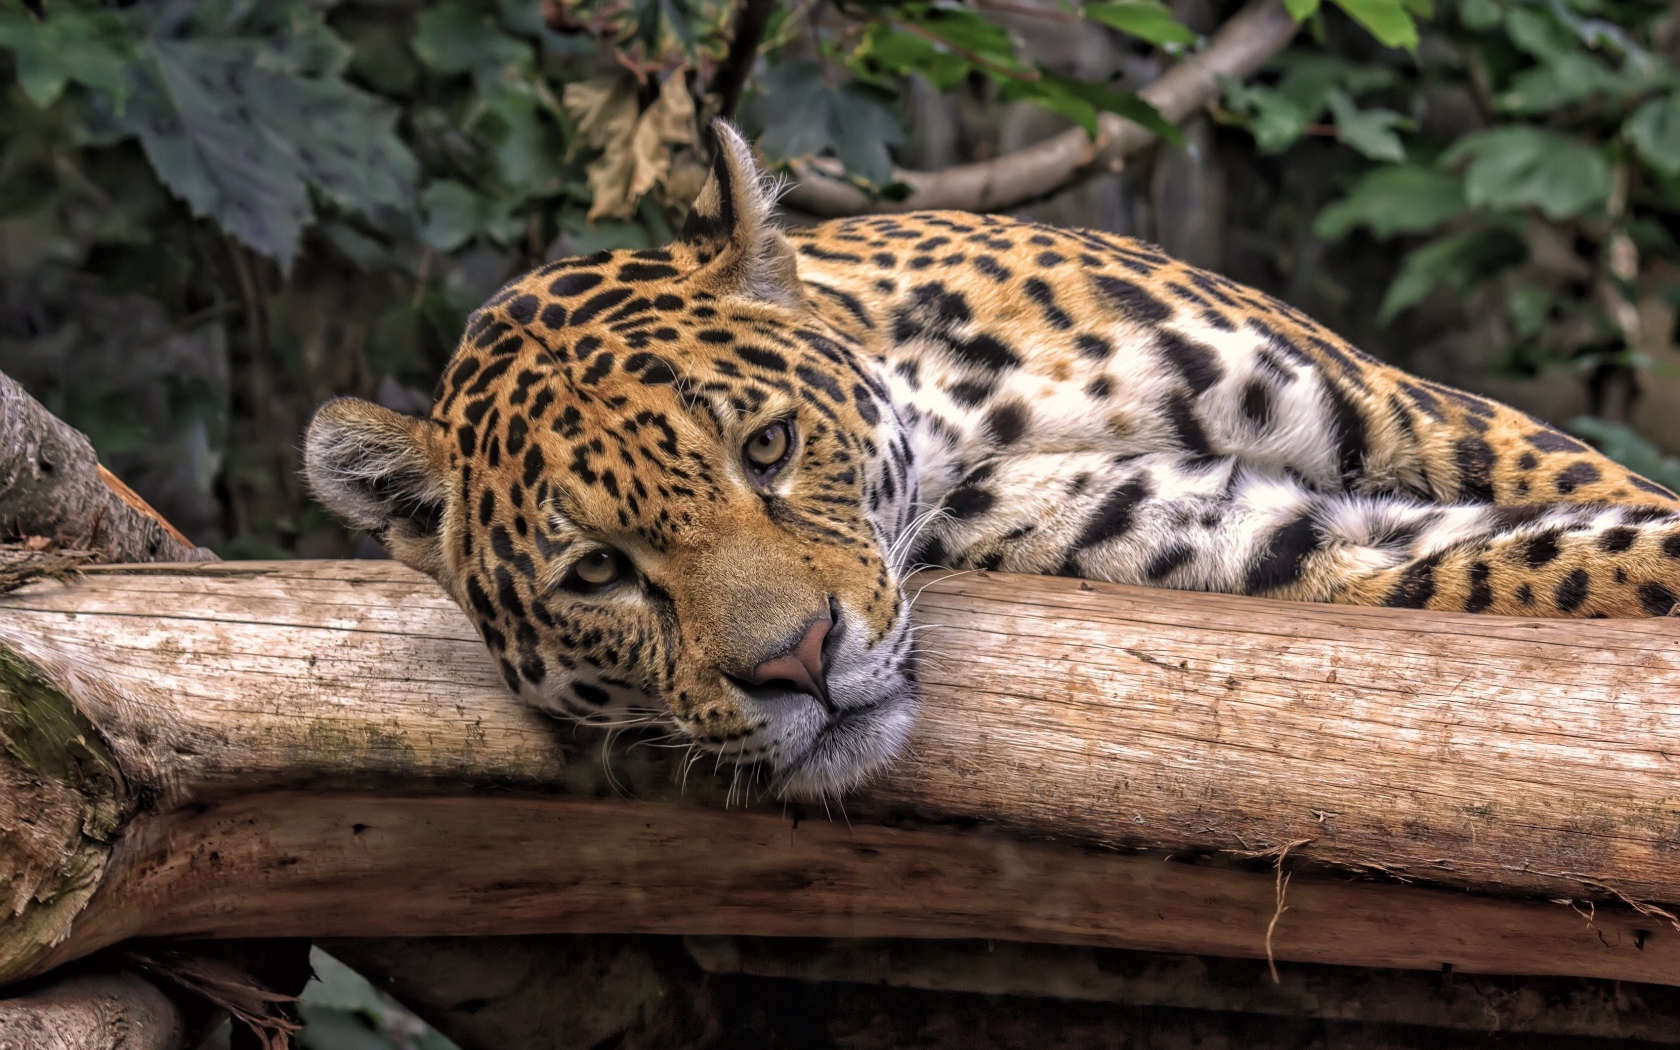 A large spotted jaguar lies on a dry tree.